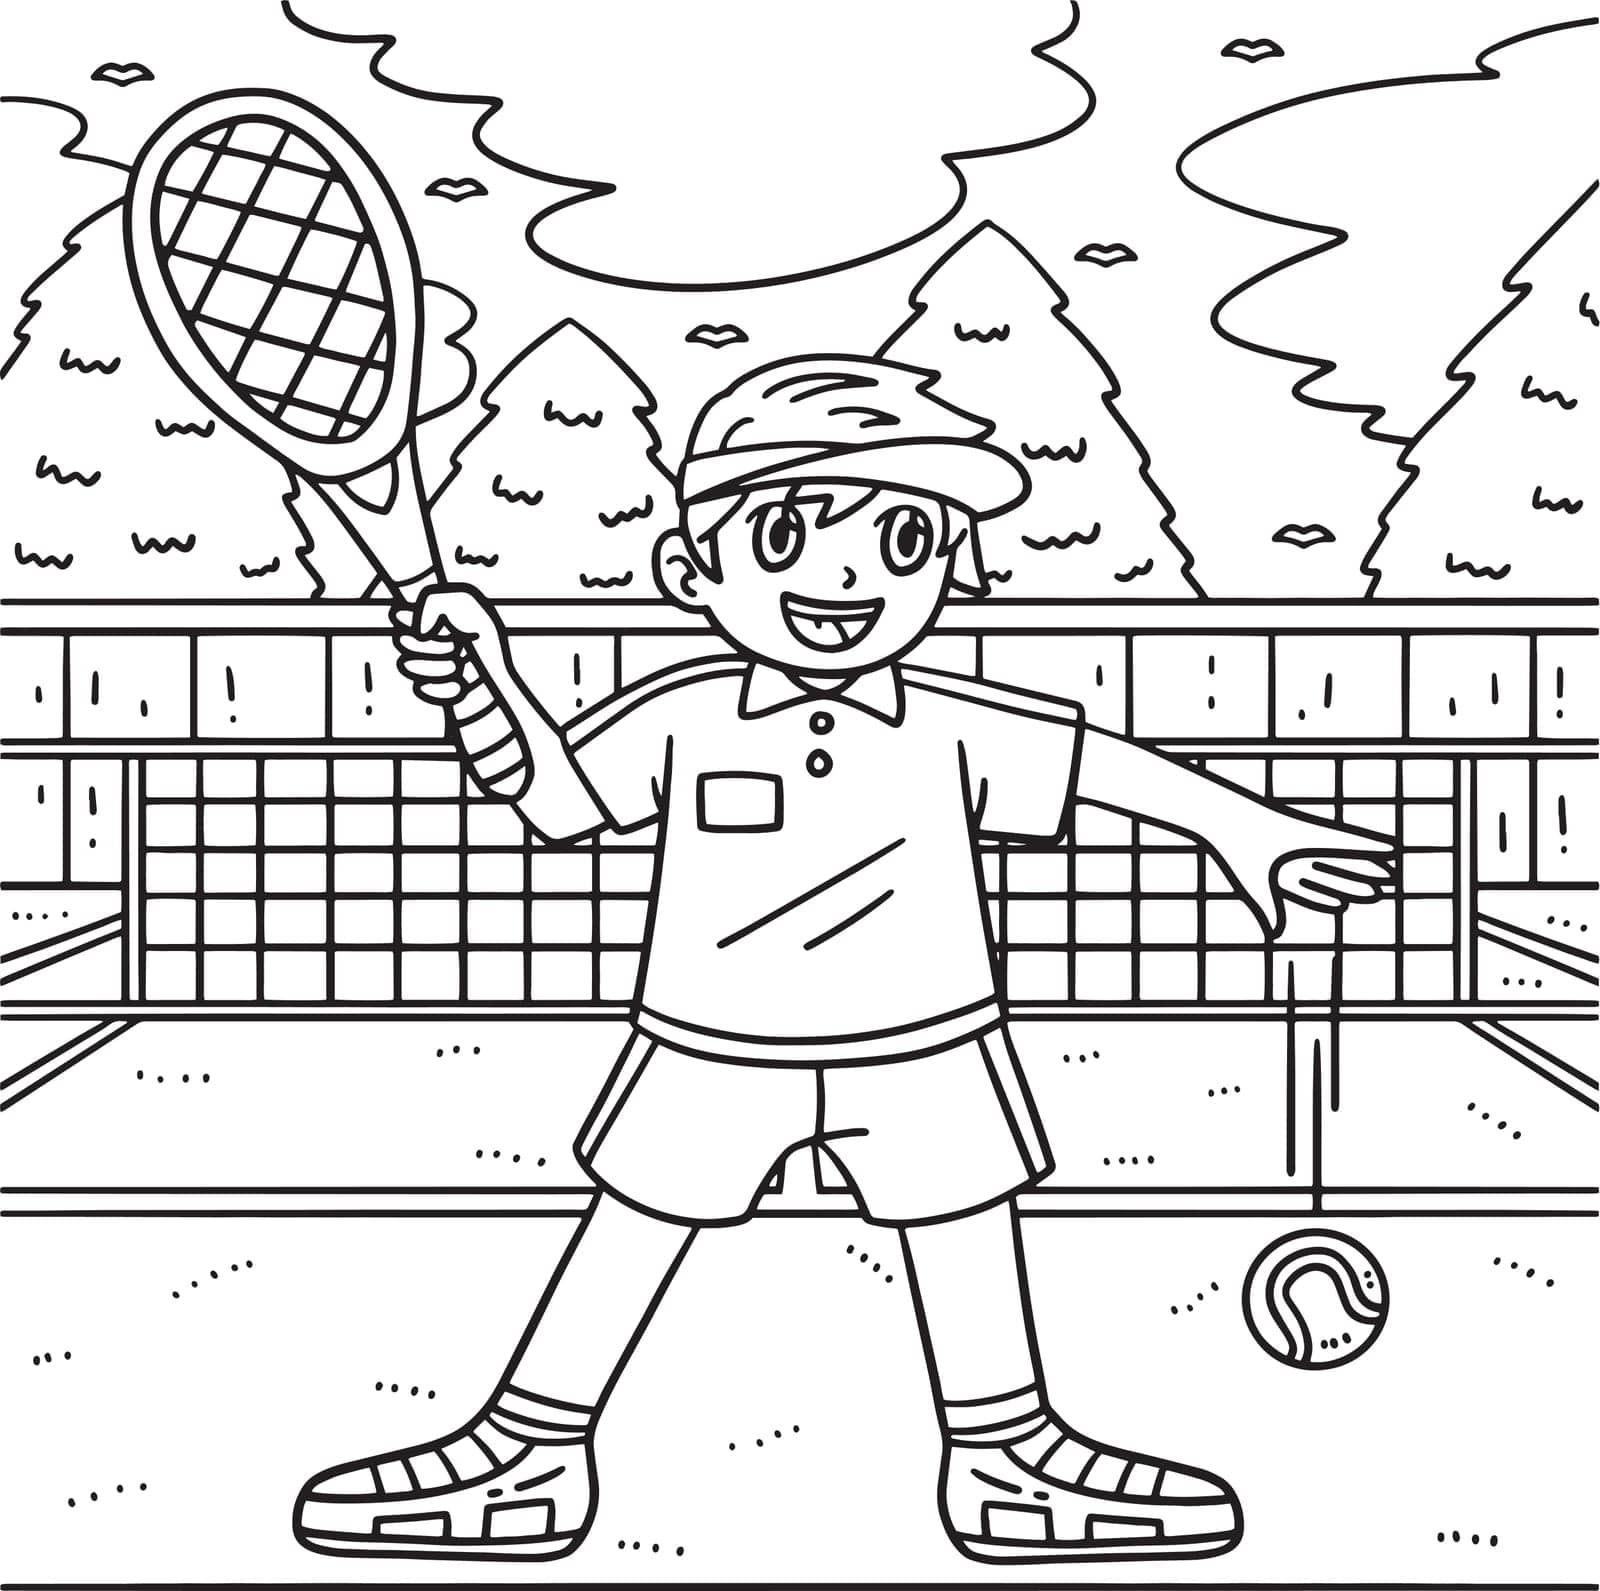 Tennis Player Dribbling Tennis Ball Coloring Page by abbydesign